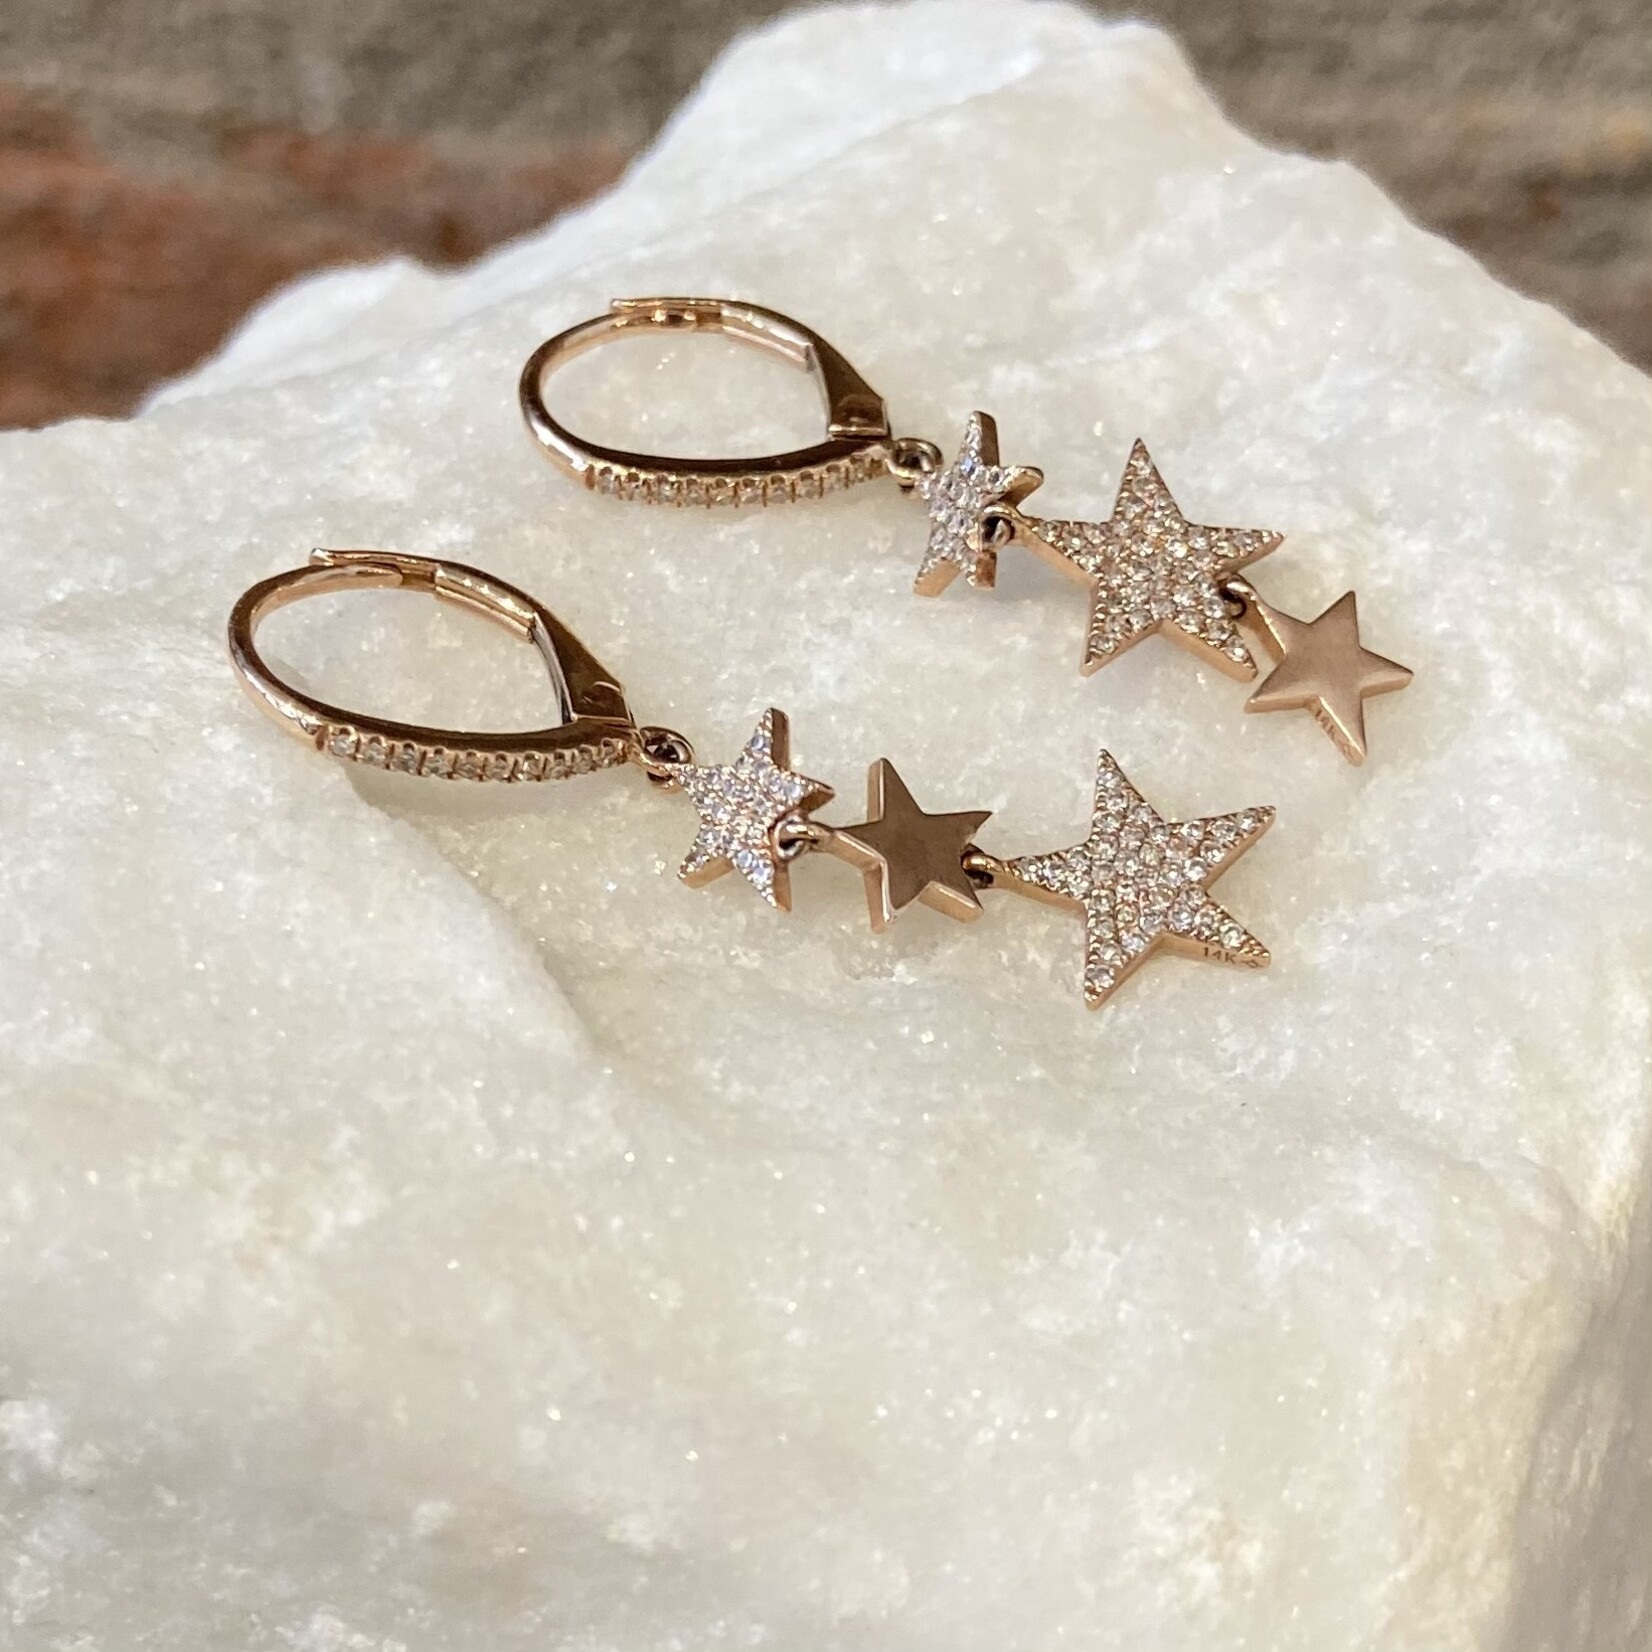 Andi Alyse Rose Gold and Diamond Hanging Star Earrings